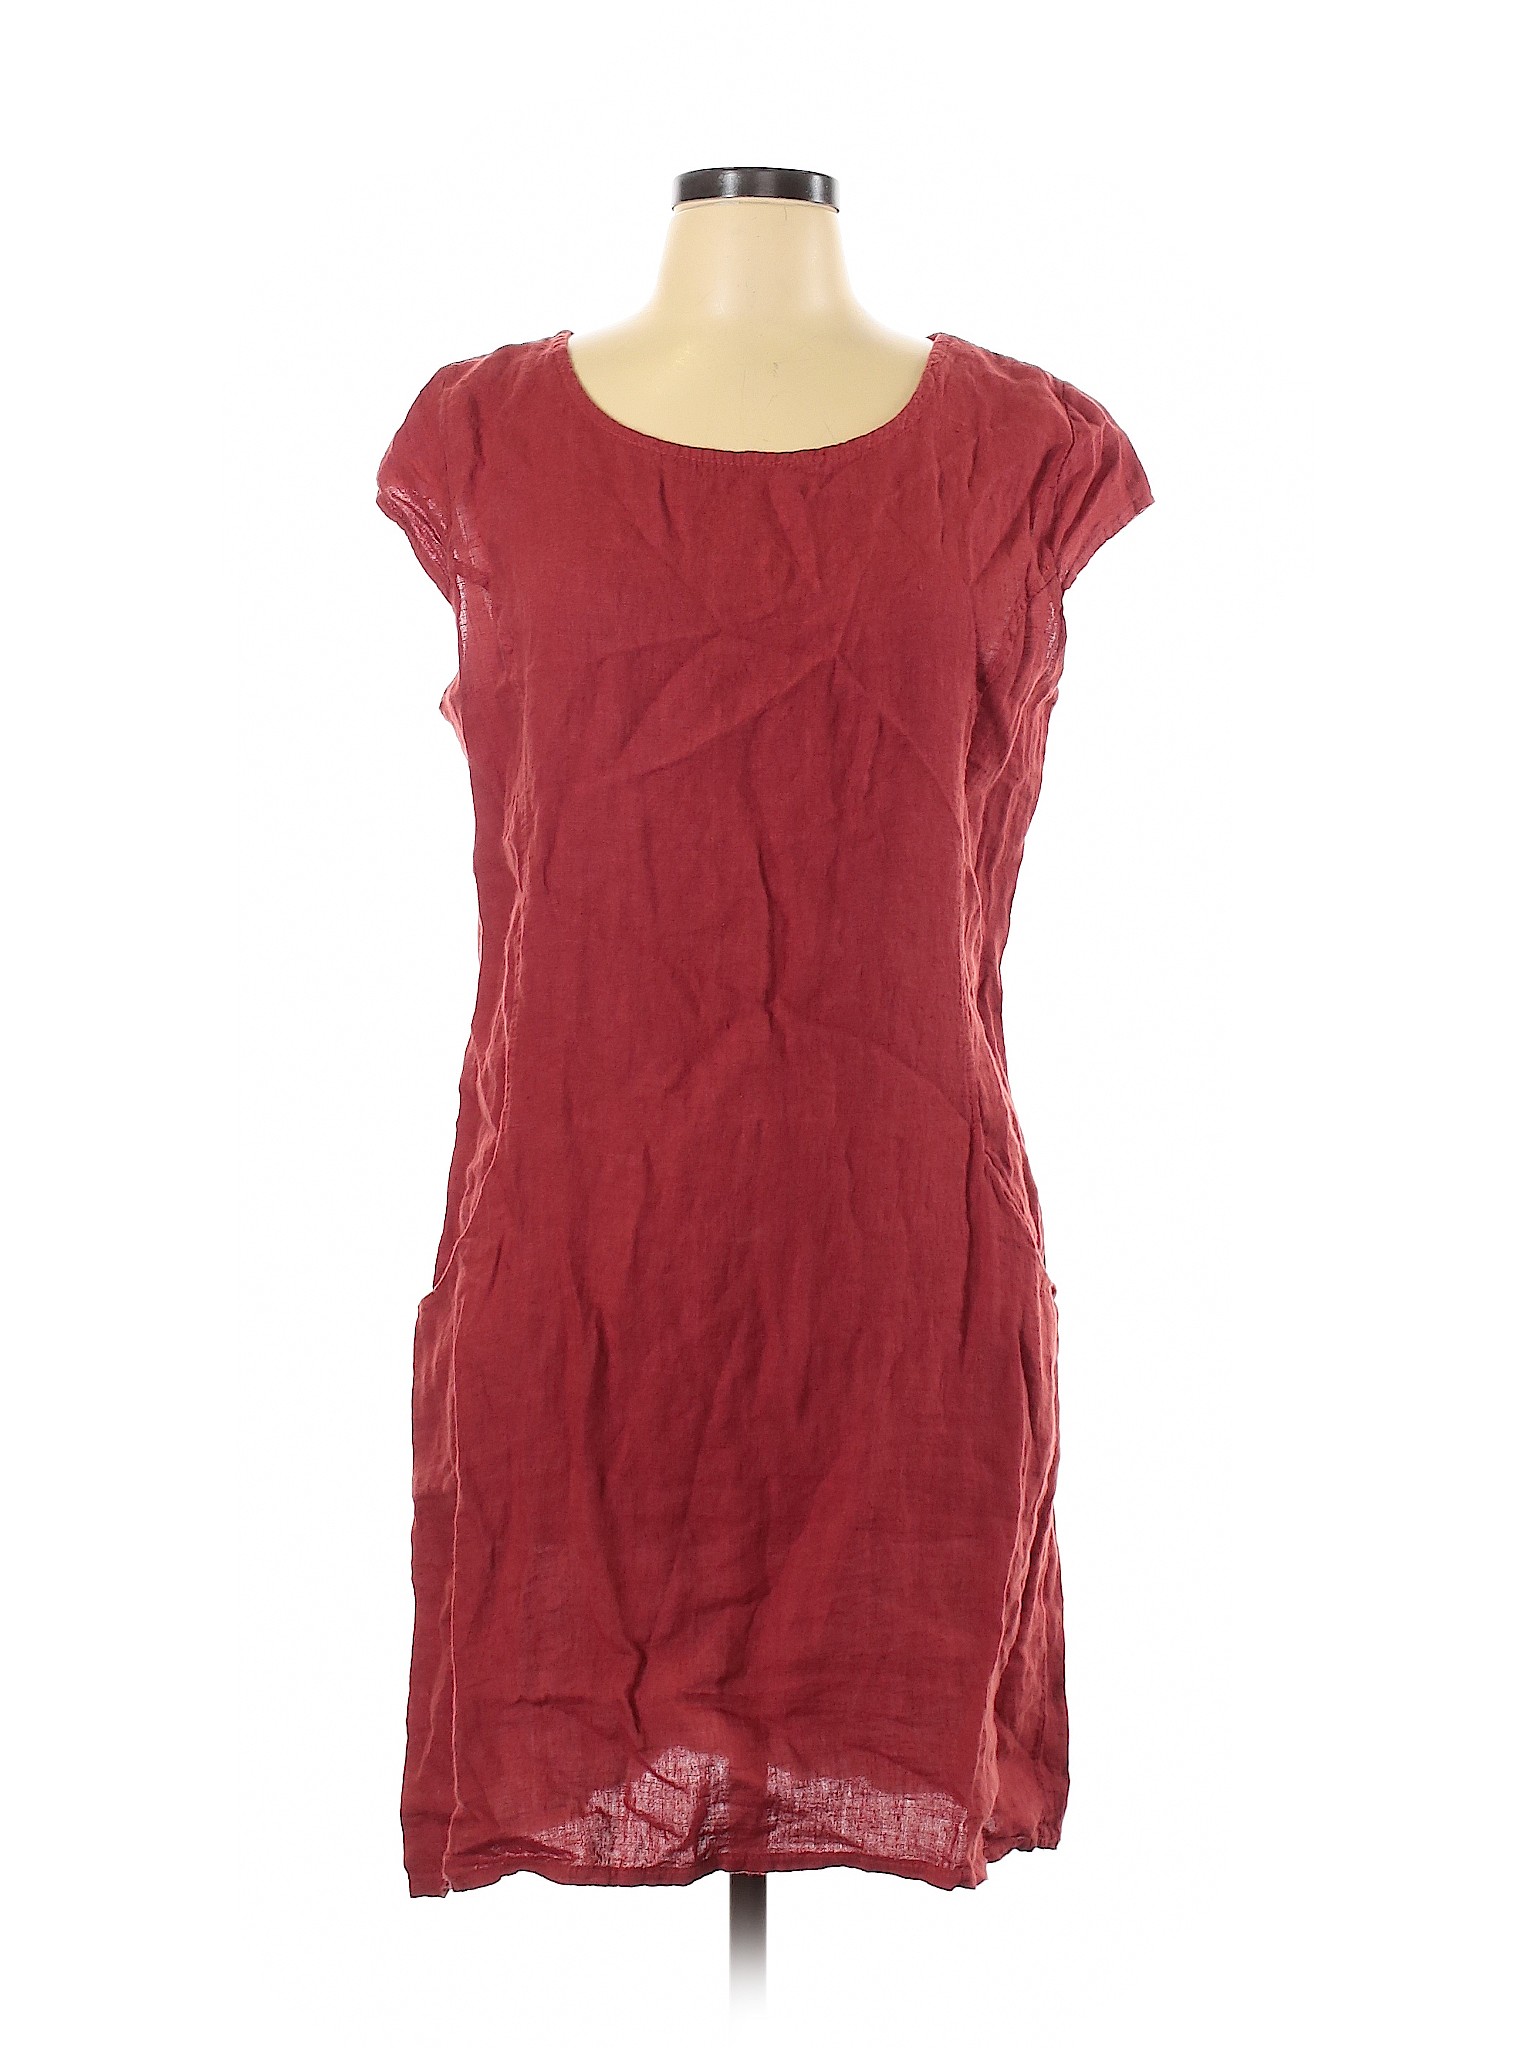 Lungo L'arno 100% Linen Maroon Red Casual Dress Size L - 33% off | thredUP